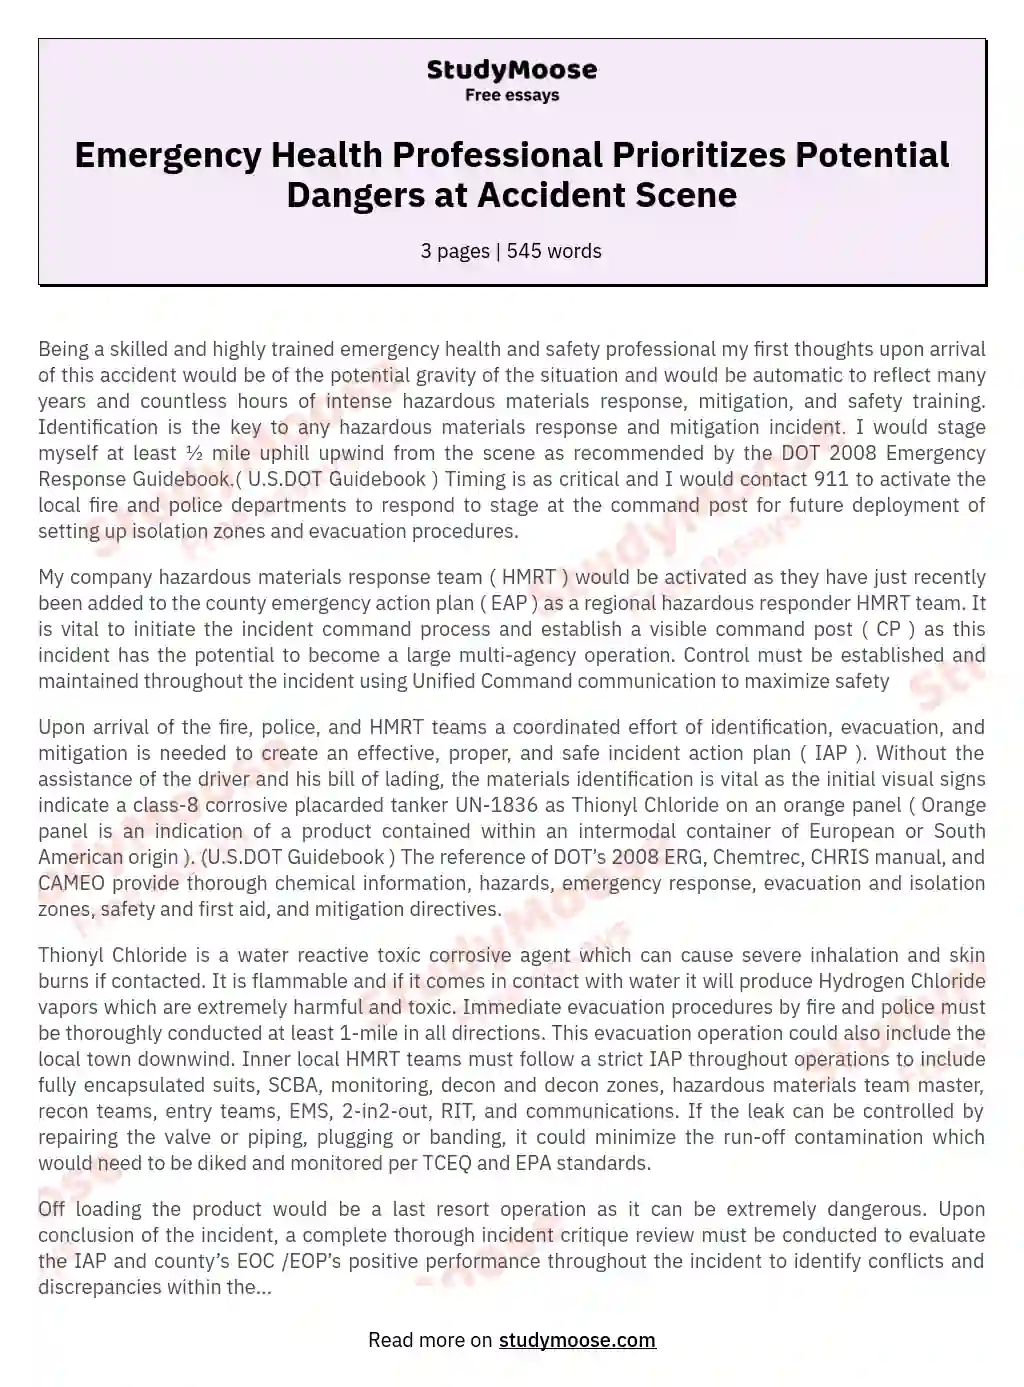 Emergency Health Professional Prioritizes Potential Dangers at Accident Scene essay